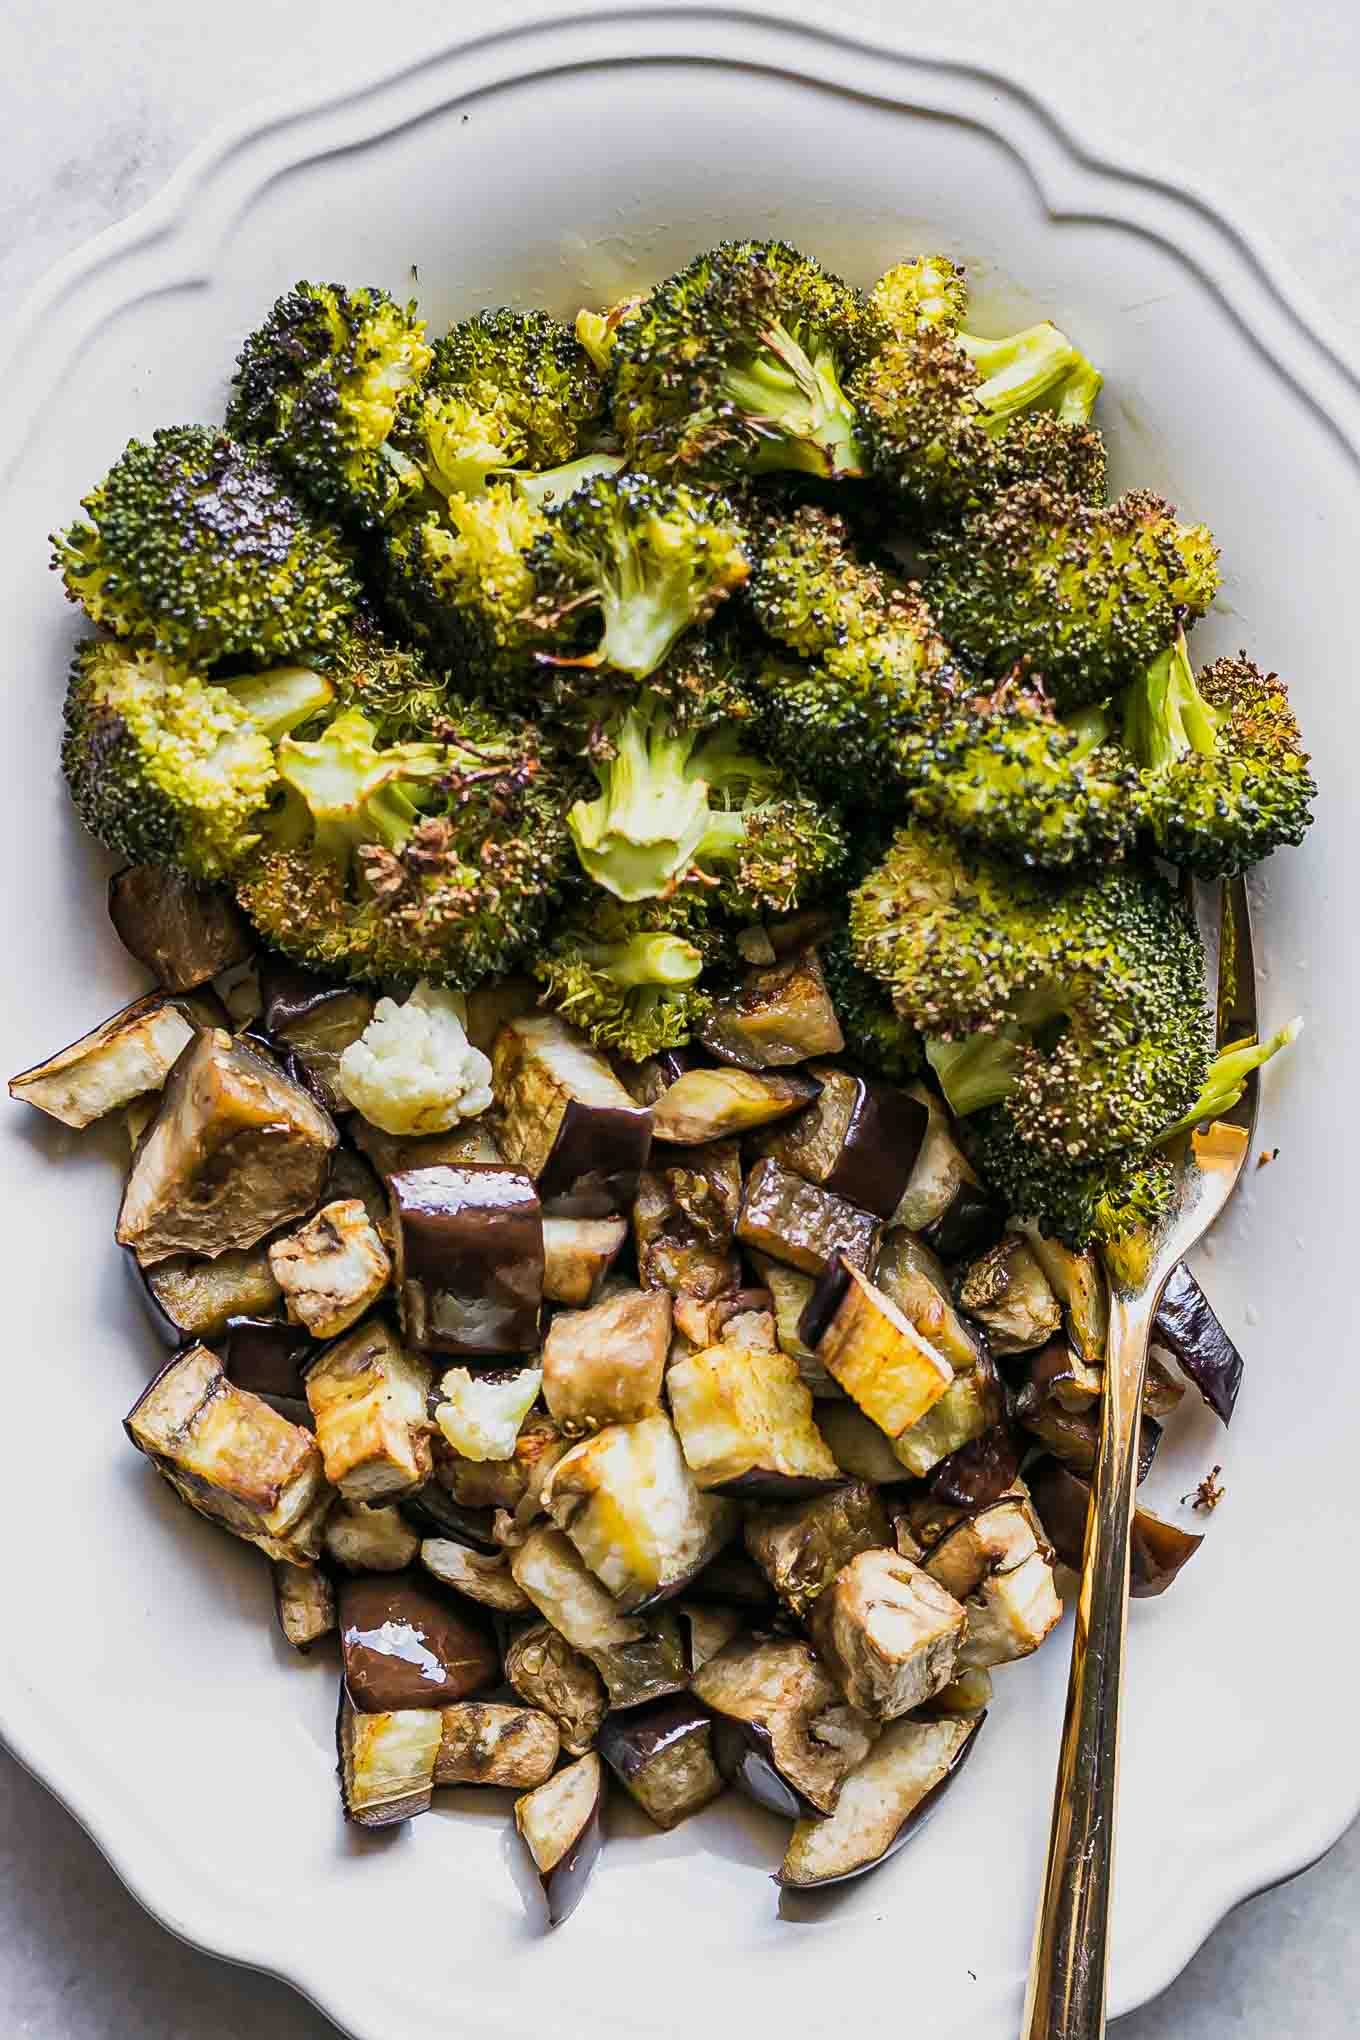 a close up photo of roasted eggplant and broccoli on a white plate